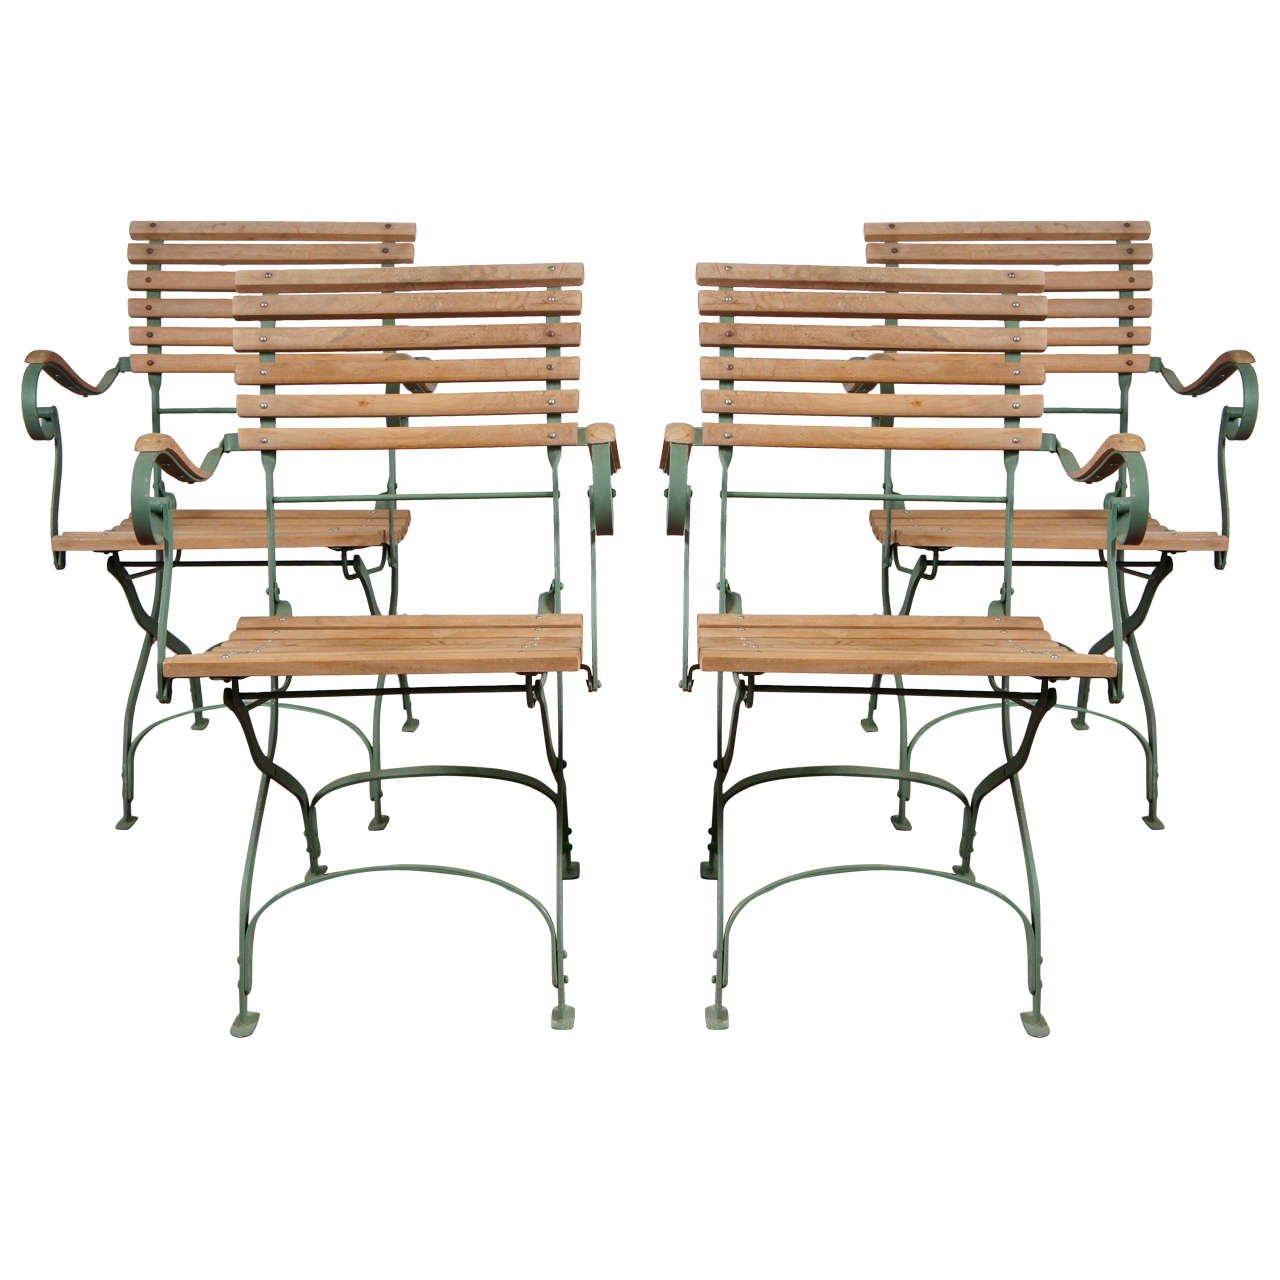 4 French Folding Outdoor Garden/Terrace Chairs